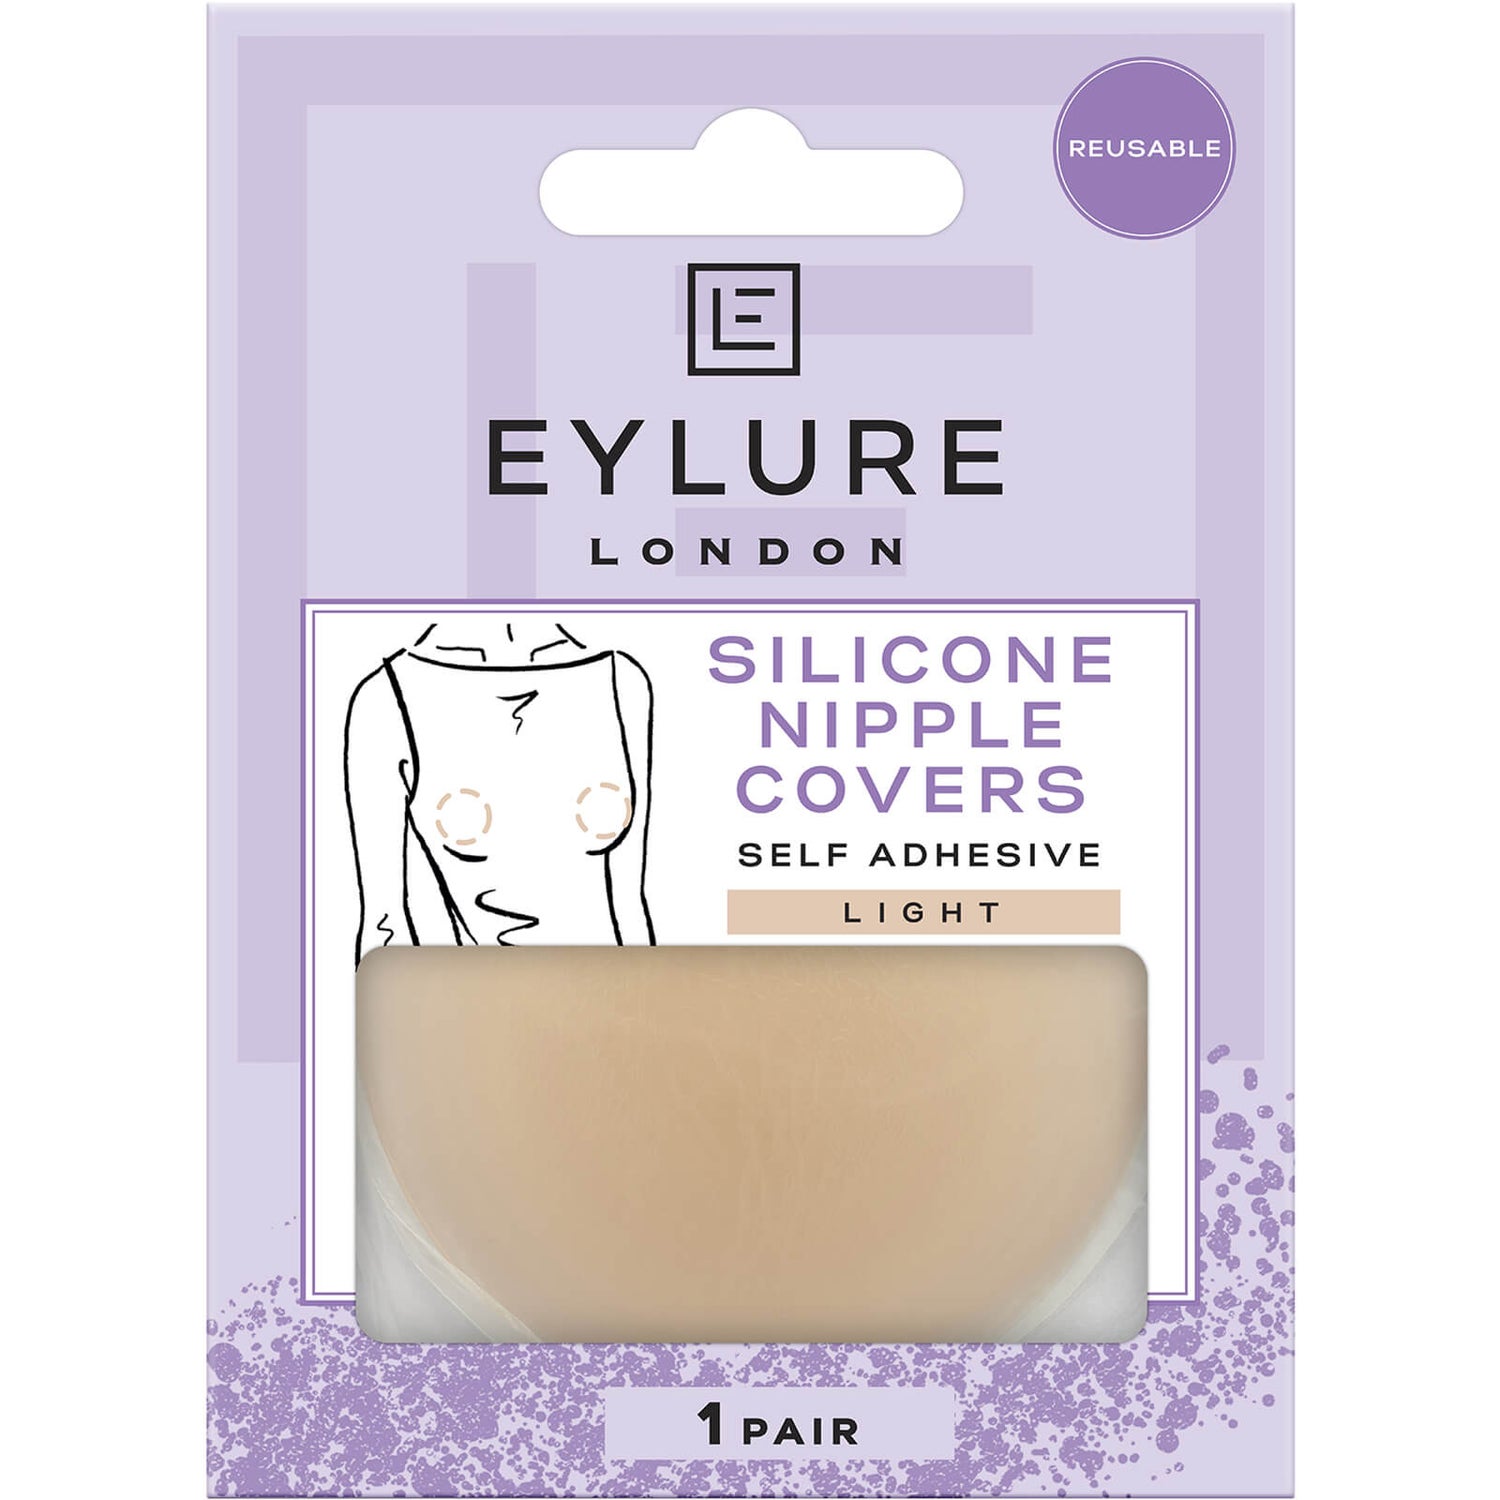 Eylure Silicone Nipple Cover (1 Pair)